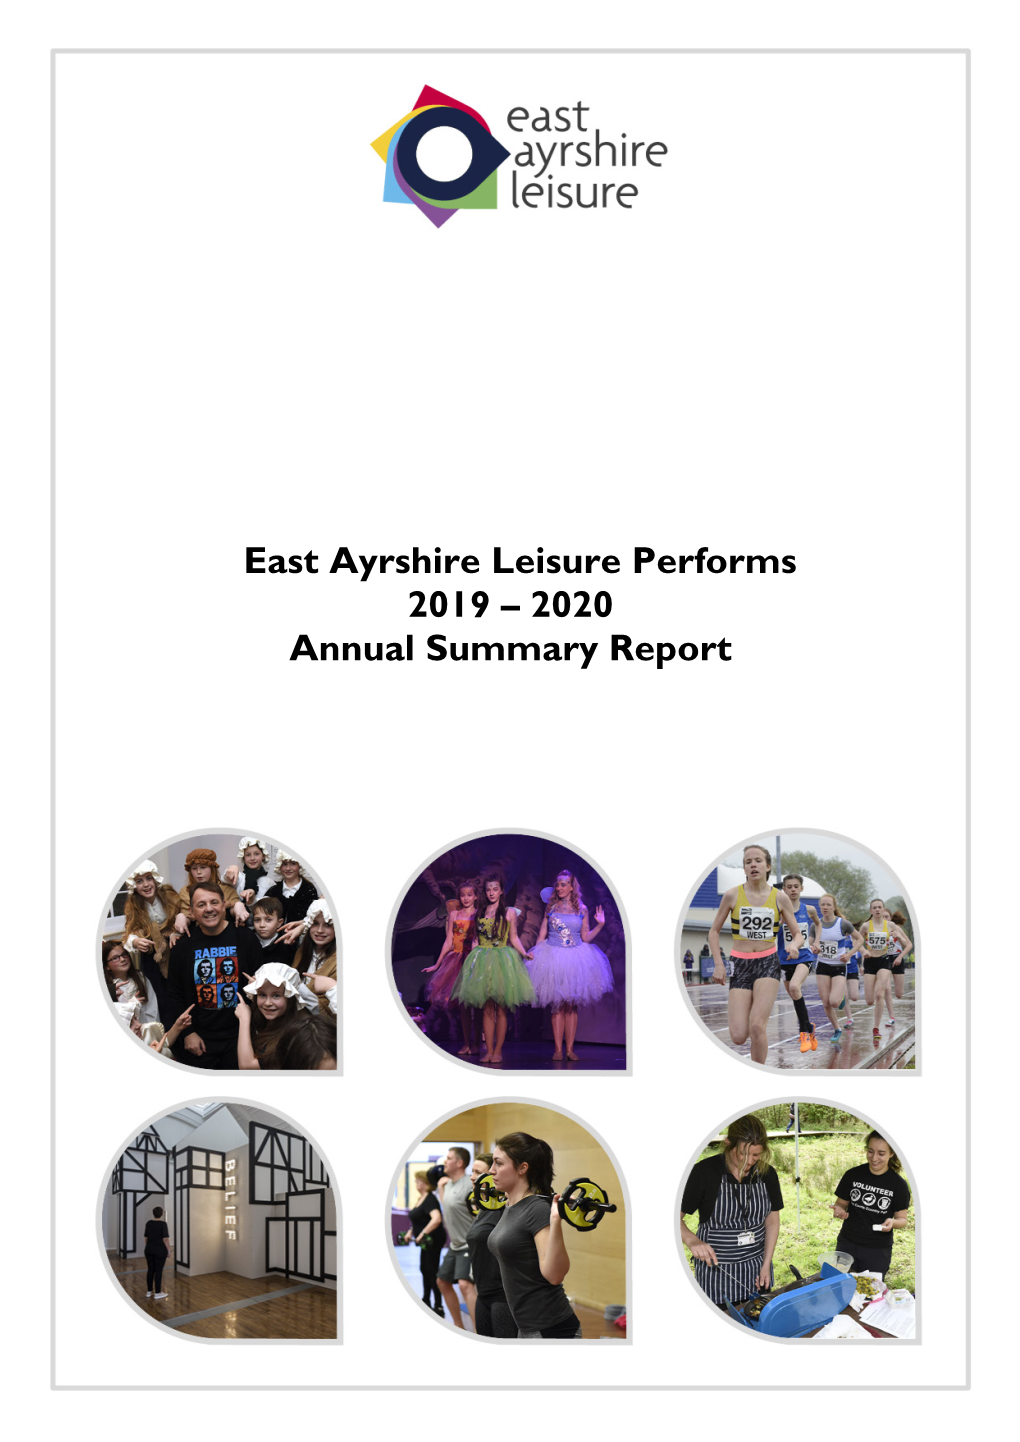 East Ayrshire Leisure Performs 2019 – 2020 Annual Summary Report